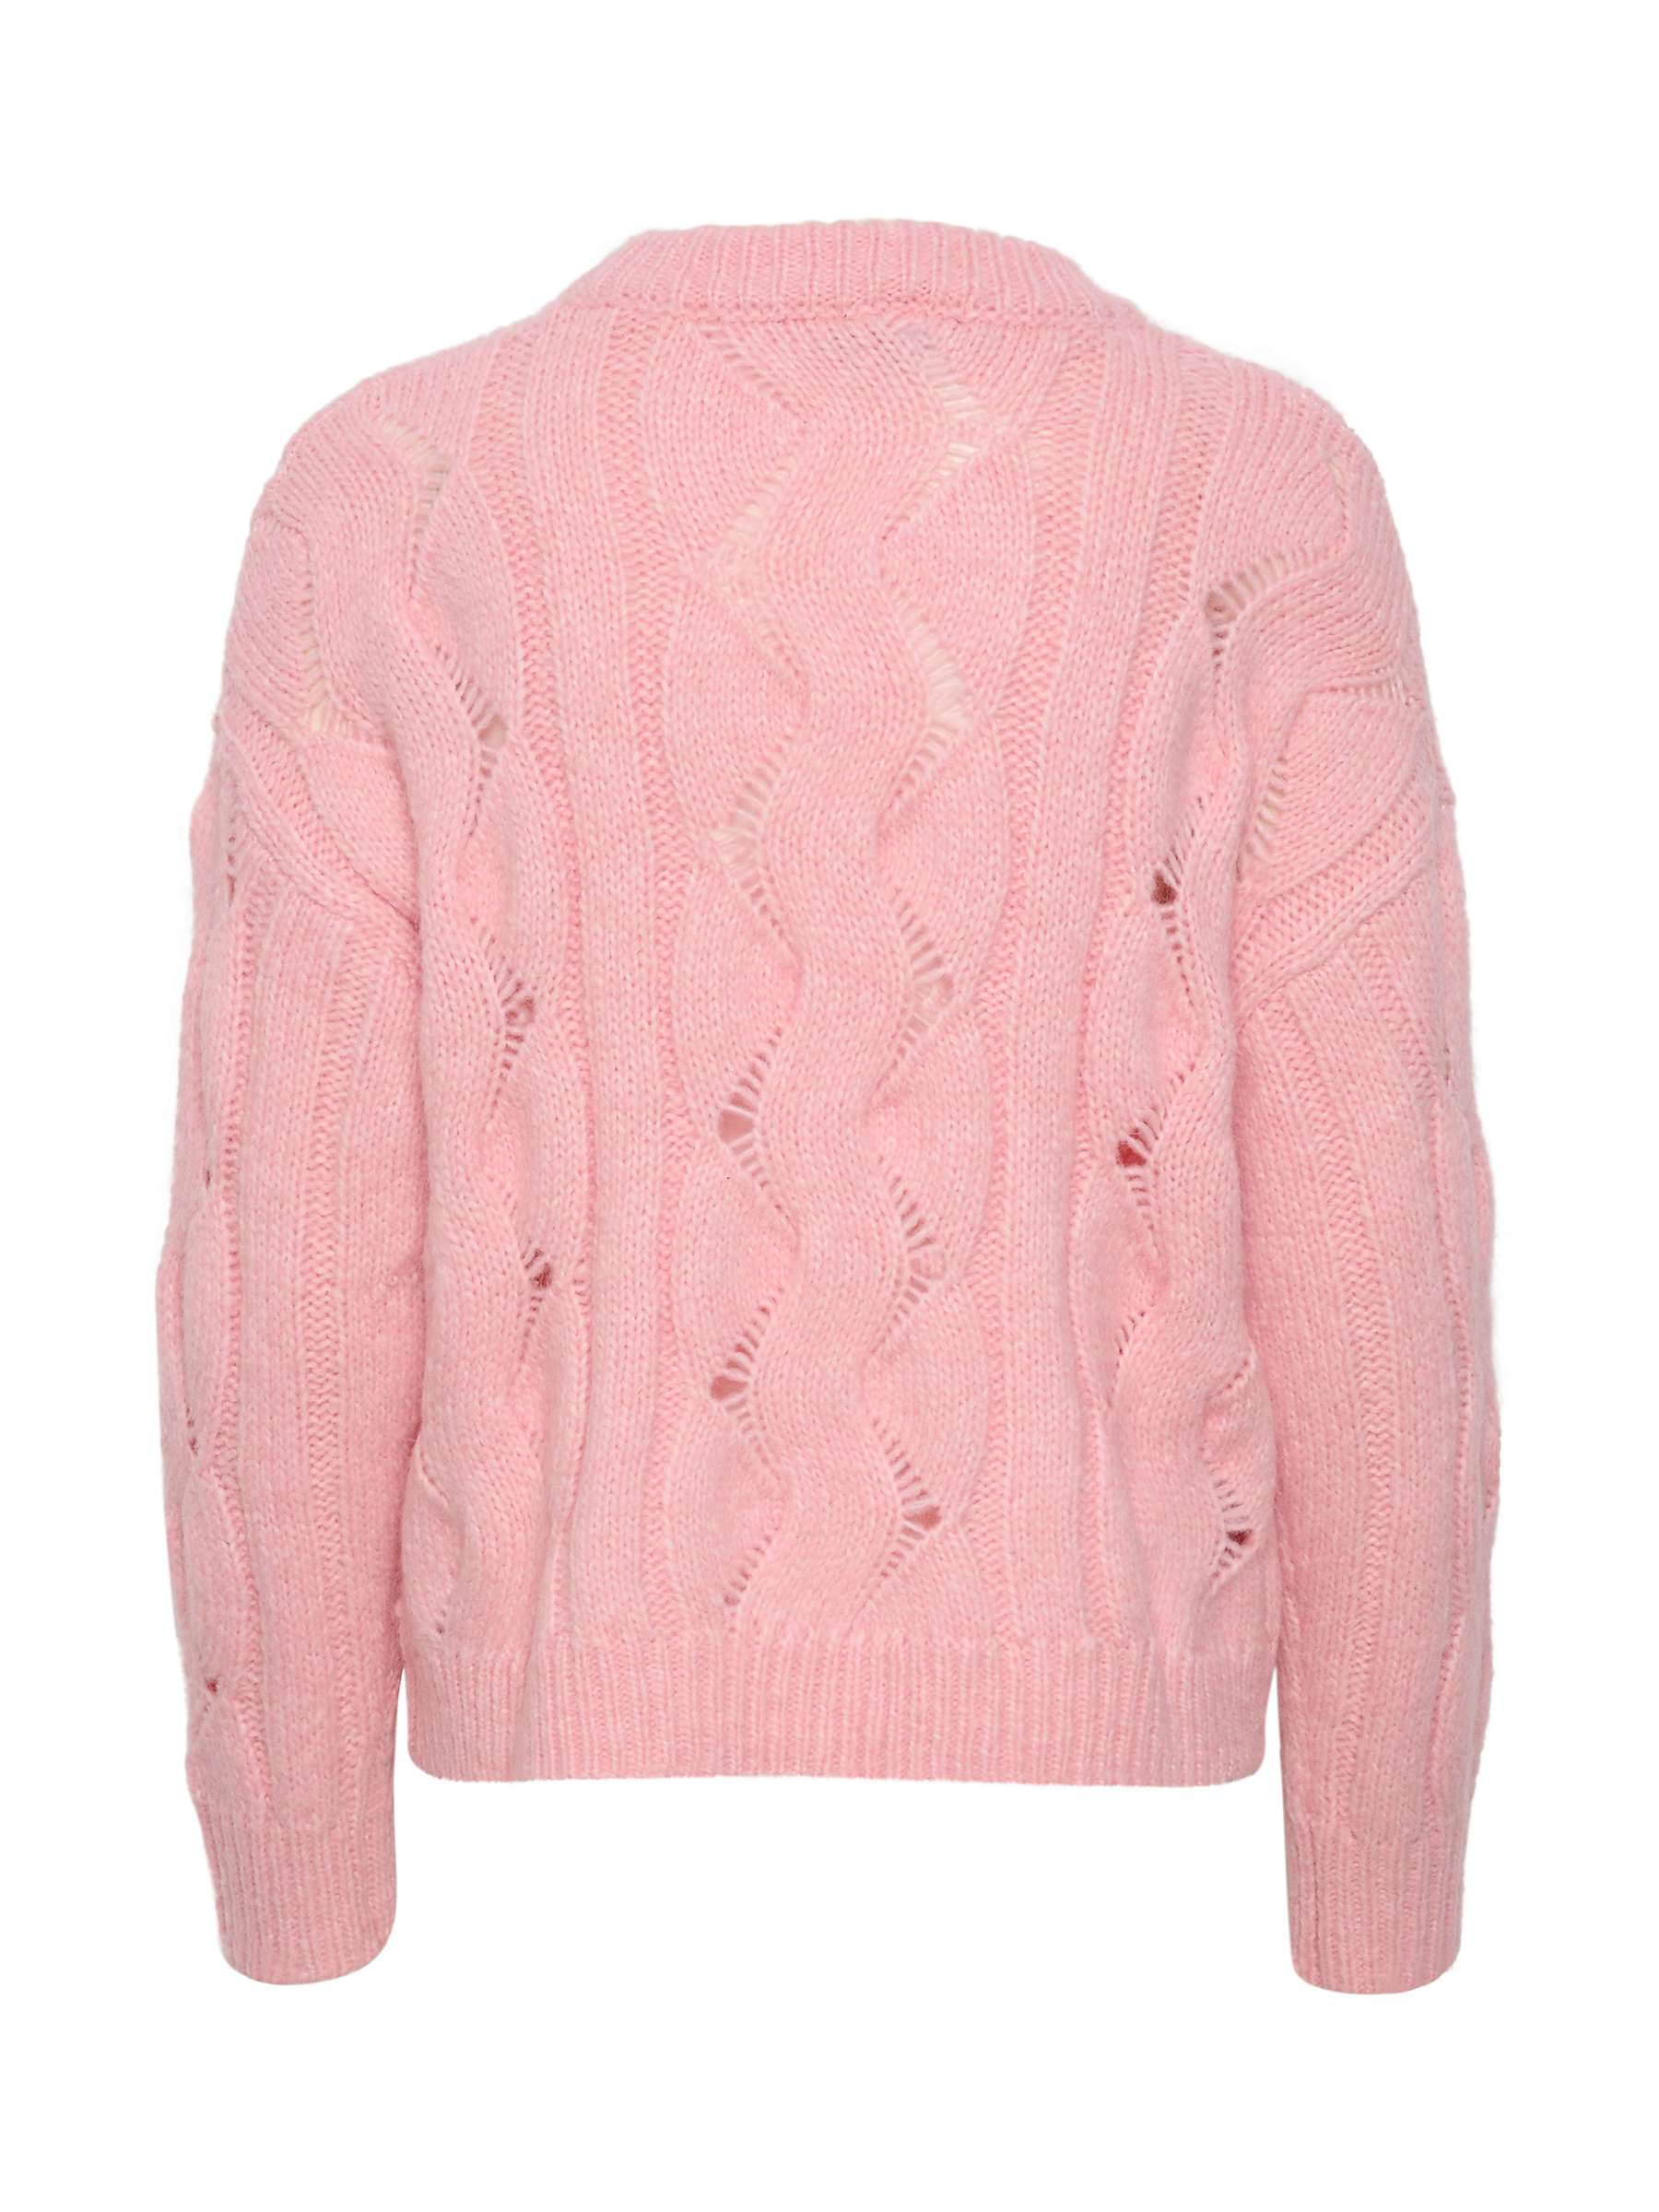 Buy Soaked In Luxury Gunn Cable Knit Crew Neck Pullover, Coral Blush Online at johnlewis.com